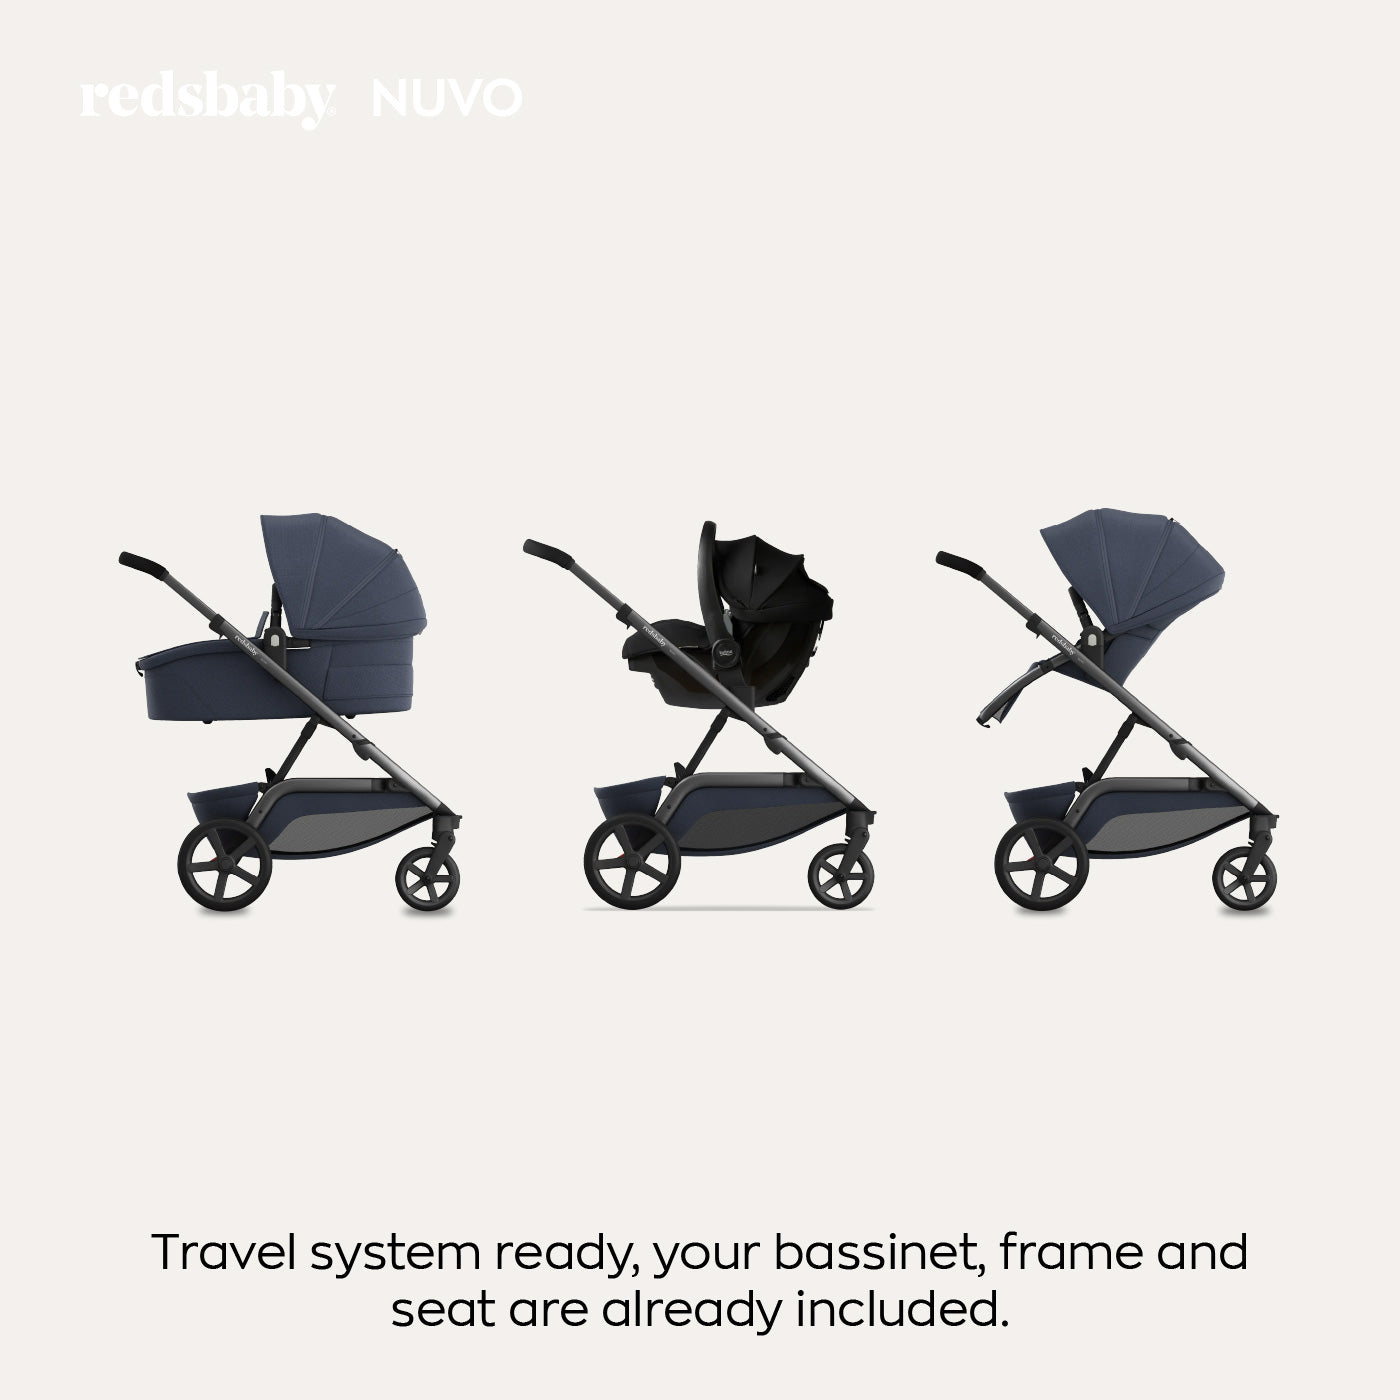 Image displaying three configurations of a navy blue stroller with the text "reds baby NUVO. Travel system ready, your bassinet, frame and seat are already included." The strollers are shown with a bassinet, as a single seat, and as a single seat with the bassinet attached.